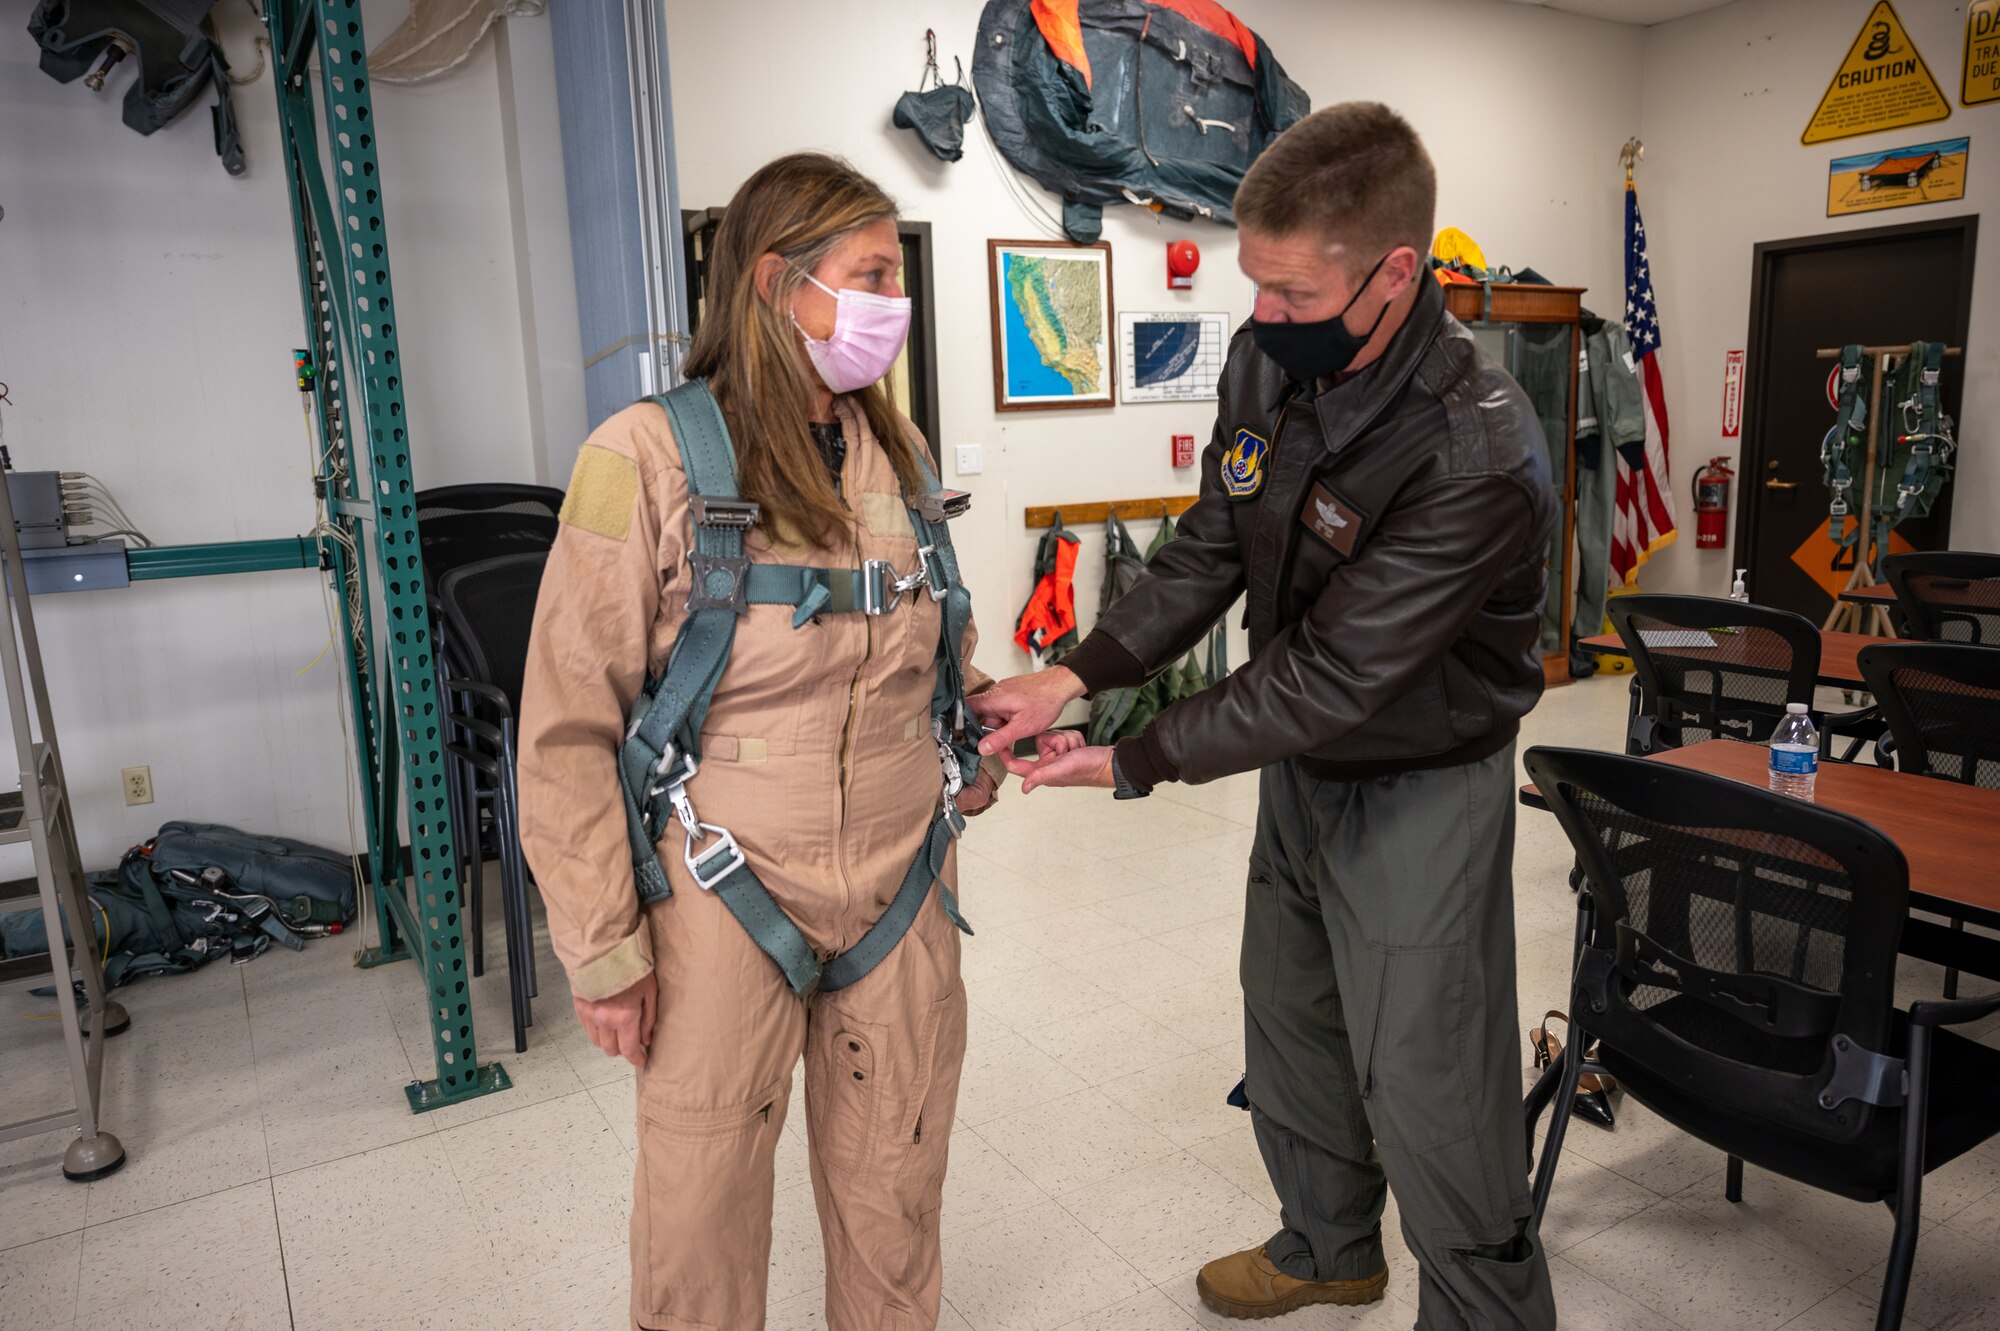 Lt. Col. Joshua Egan, 412th Test Wing Chief of Safety, briefs Laura Macaluso, Director, Department of Defense Force Safety and Occupational Health, on flight safety equipment prior to her orientation flight